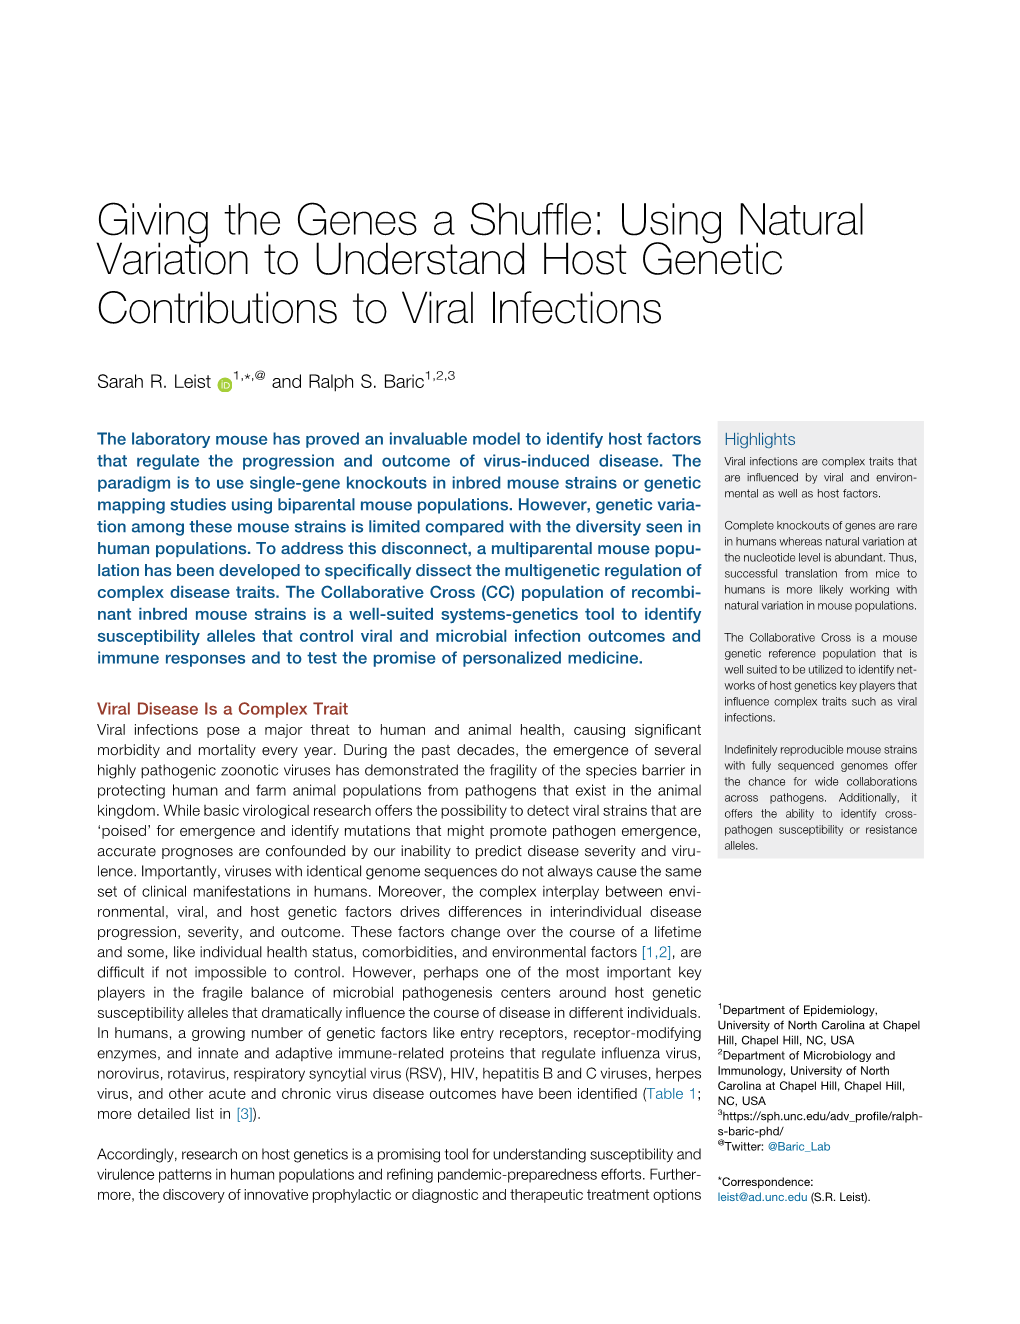 Giving the Genes a Shuffle: Using Natural Variation to Understand